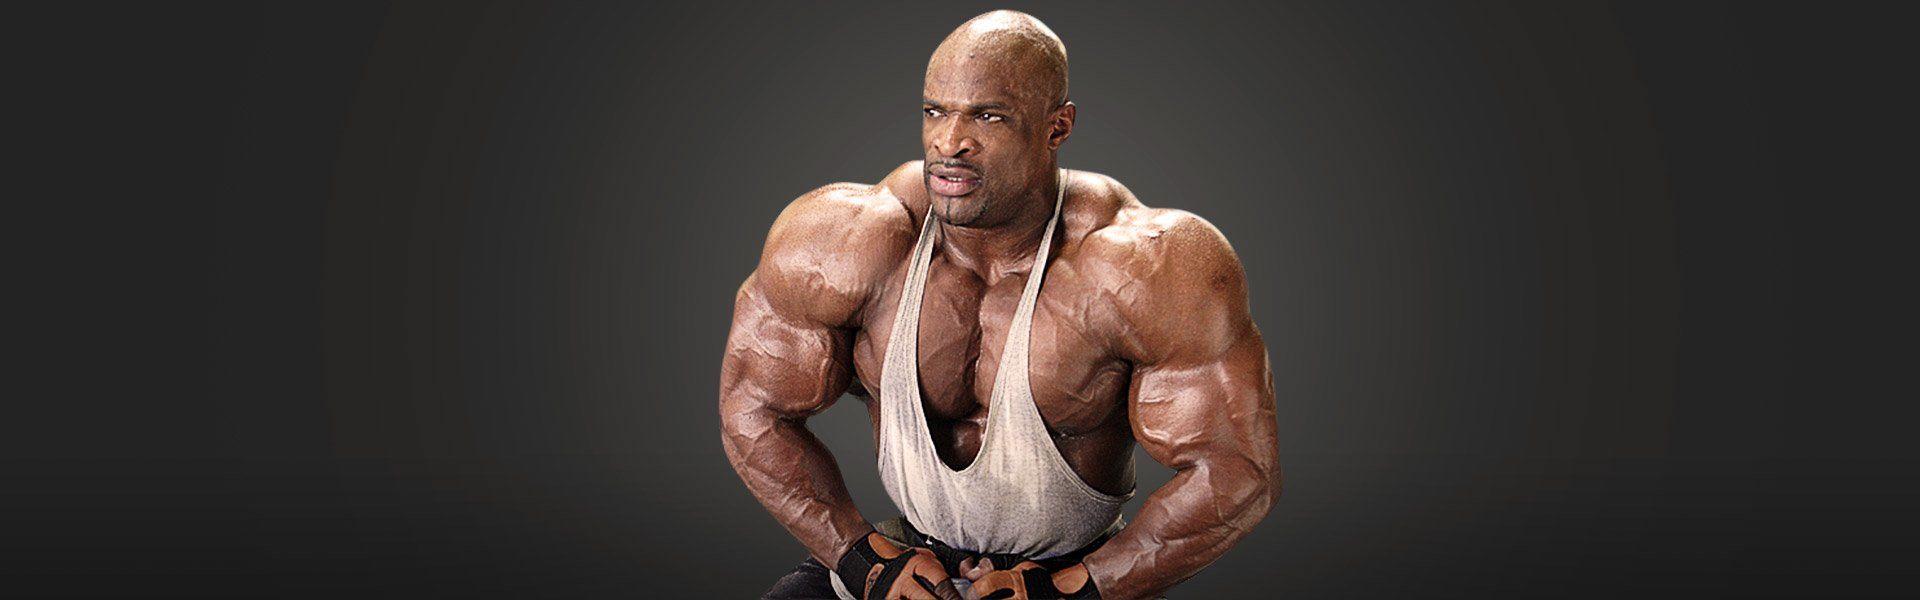 Ronnie Coleman Fitness 360